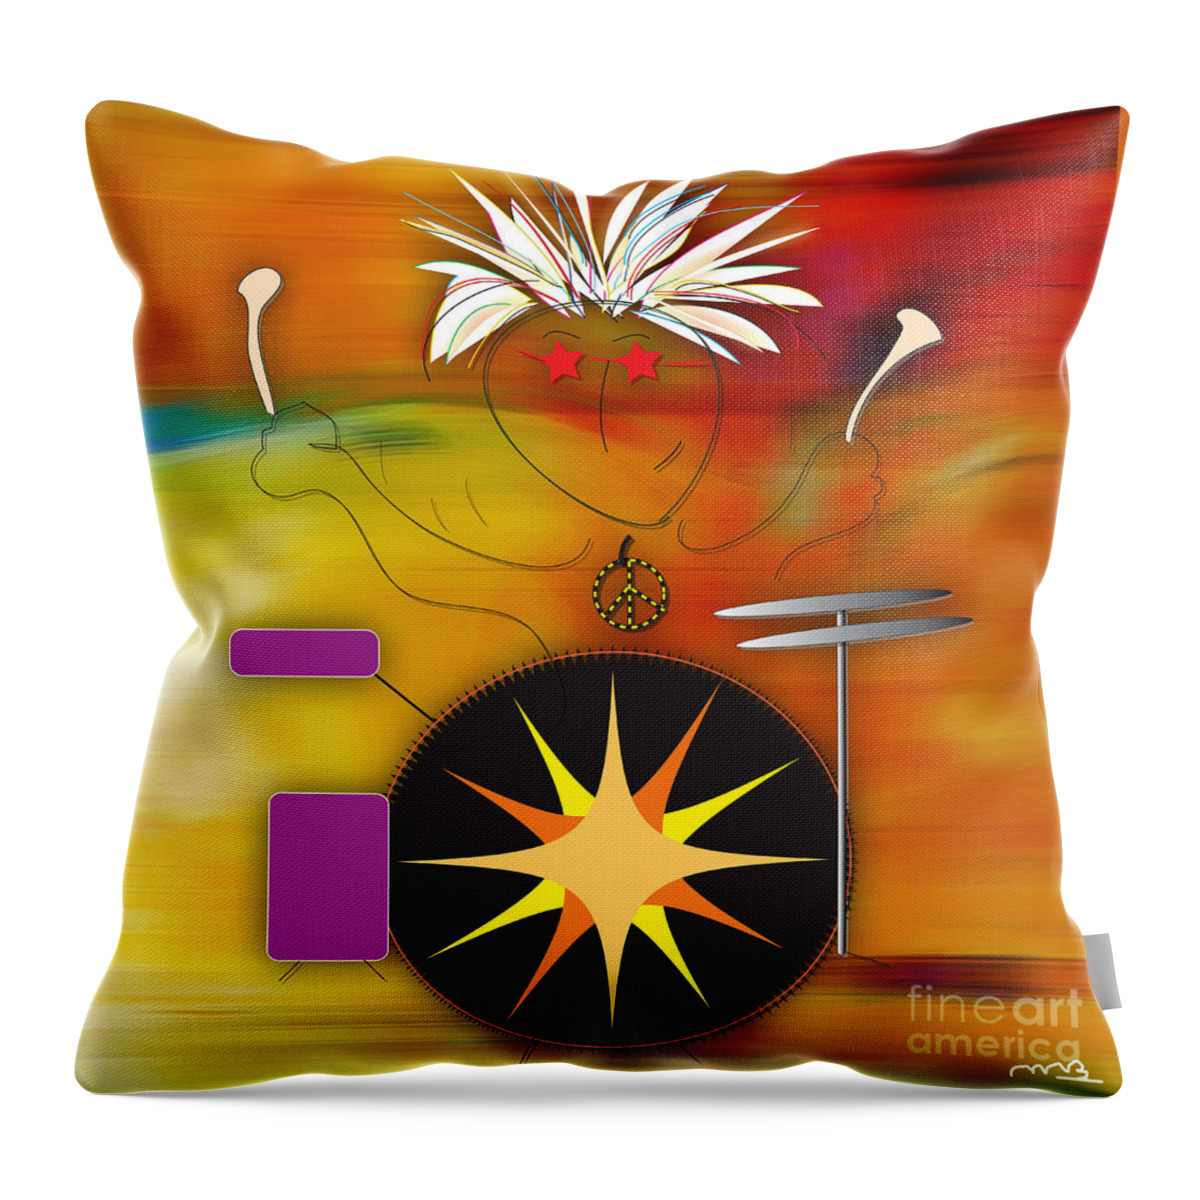 Drums Digital Art Throw Pillow featuring the mixed media Drummer by Marvin Blaine